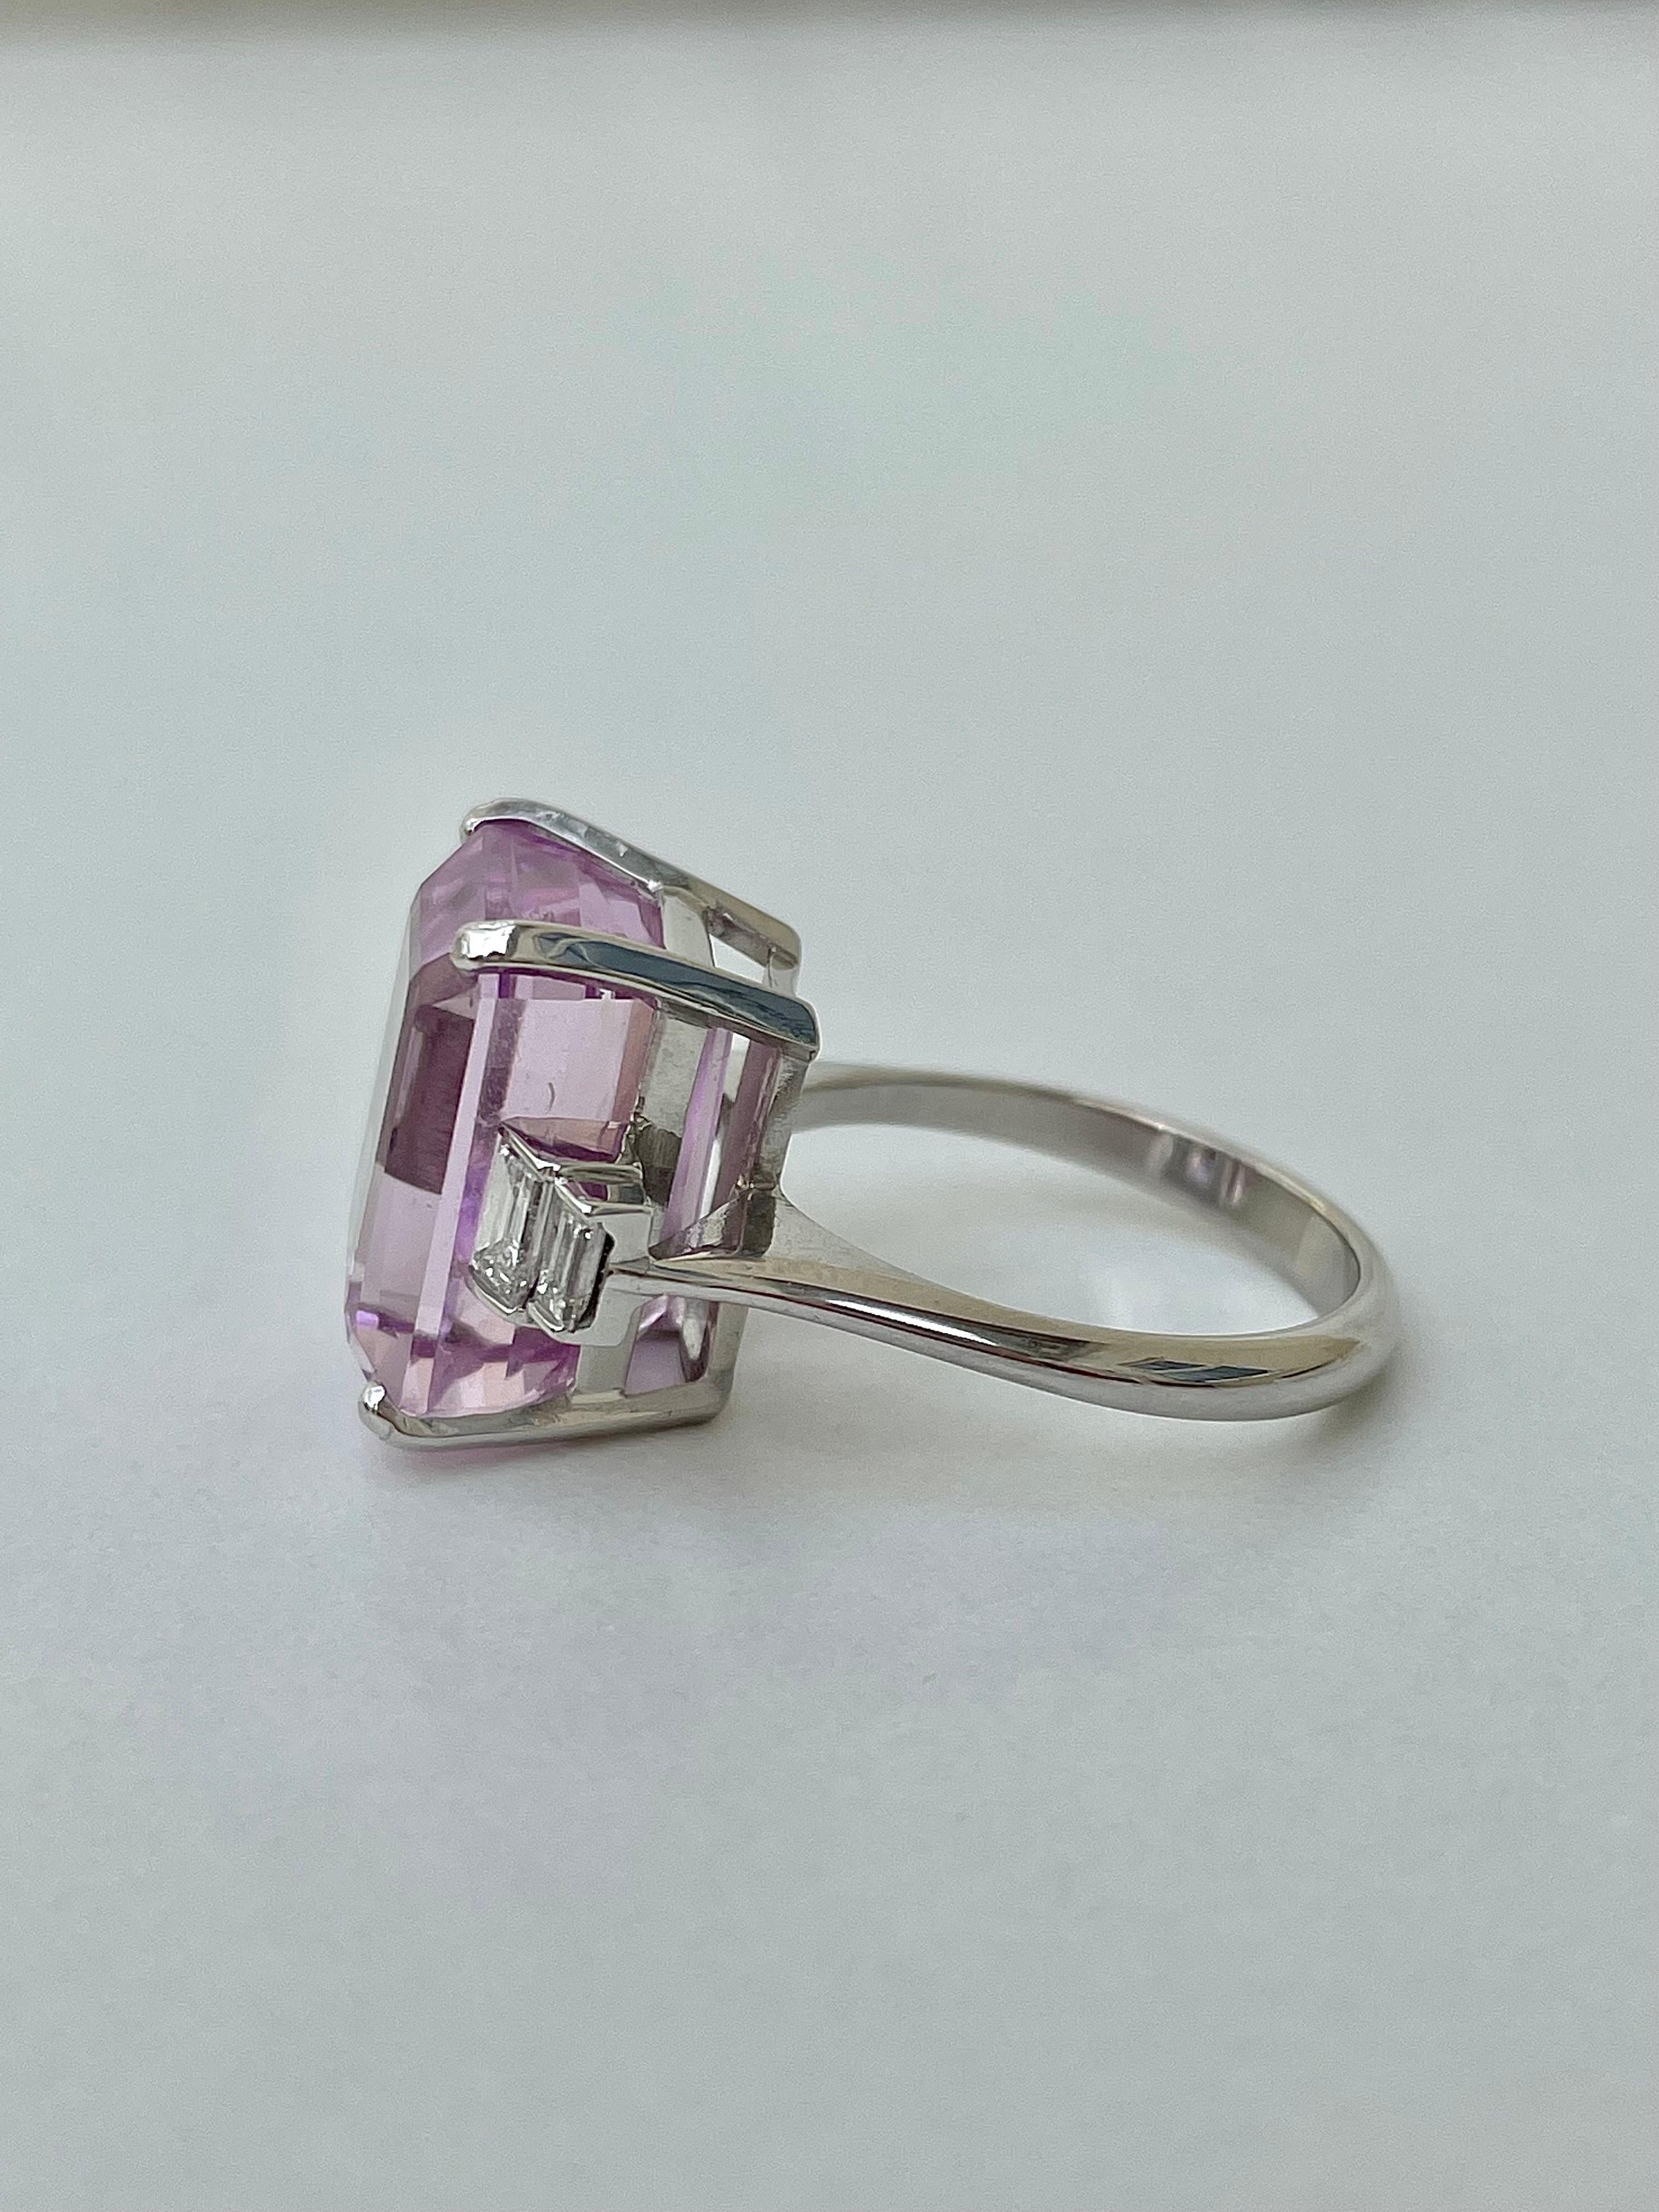 Huge 18ct White Gold Pink Kunsite and Diamond Cocktail Ring

the most incredible pink kunsite ring, she’s truly exquisite and sits so perfectly

The item comes without the box in the photos but will be presented in a gembank1973 gift